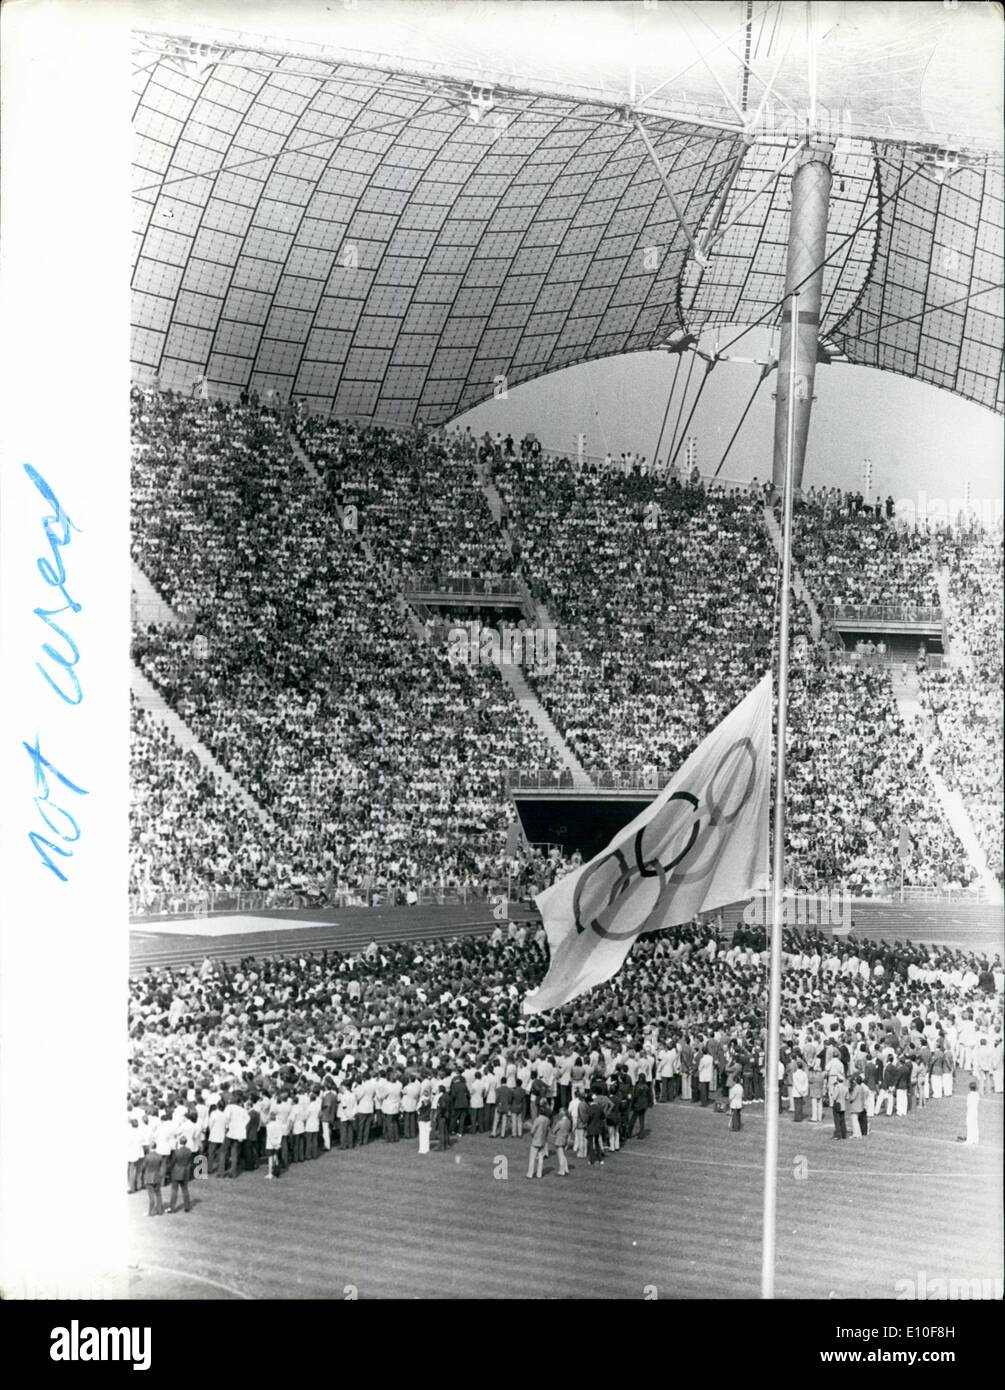 Sep. 09, 1972 - Memorial Service to dead Israel athletes.: A memorial service was held in the Olympic Arena in Munich to the Israeli athlete hostages who died in the Munich massacre. Photo shows the scene during the service in the Munich Olympic Arena, showing the Olympic flag at half- mast. Stock Photo